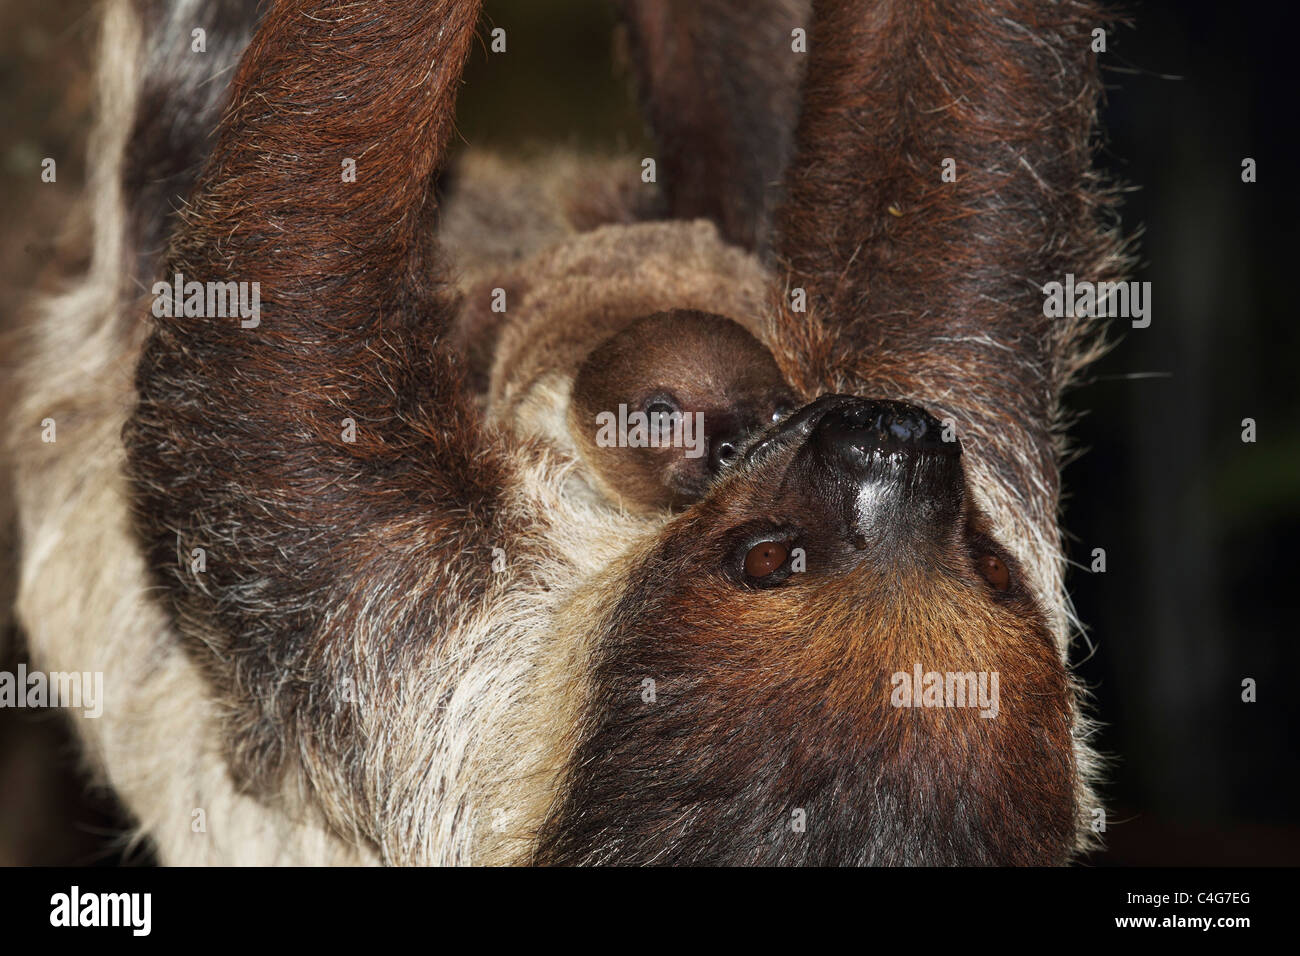 Linnaeus's two-toed sloth and cub / Choloepus didactylus Stock Photo